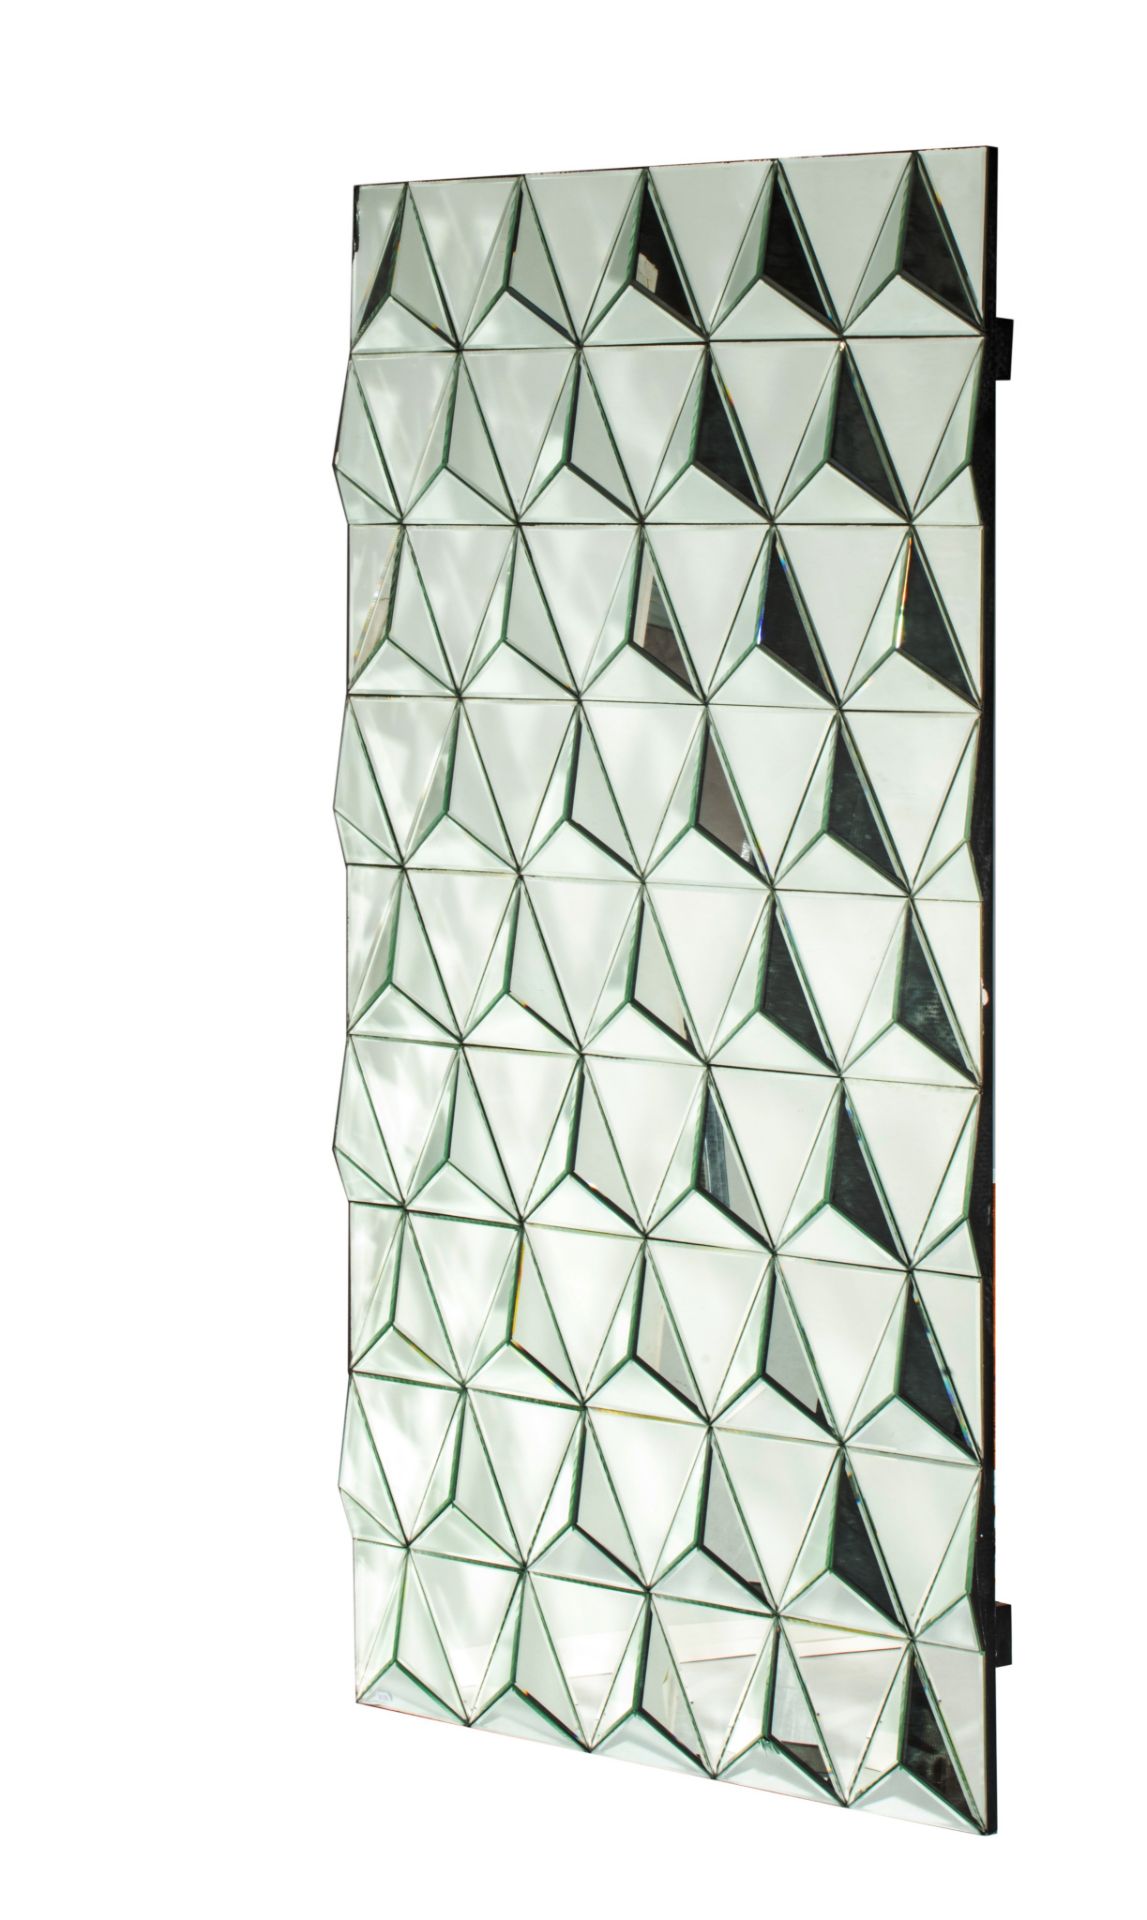 Two design wall mirrors with geometric diamond pattern, 96,5 x 151 - 100 x 157 cm - Image 4 of 8